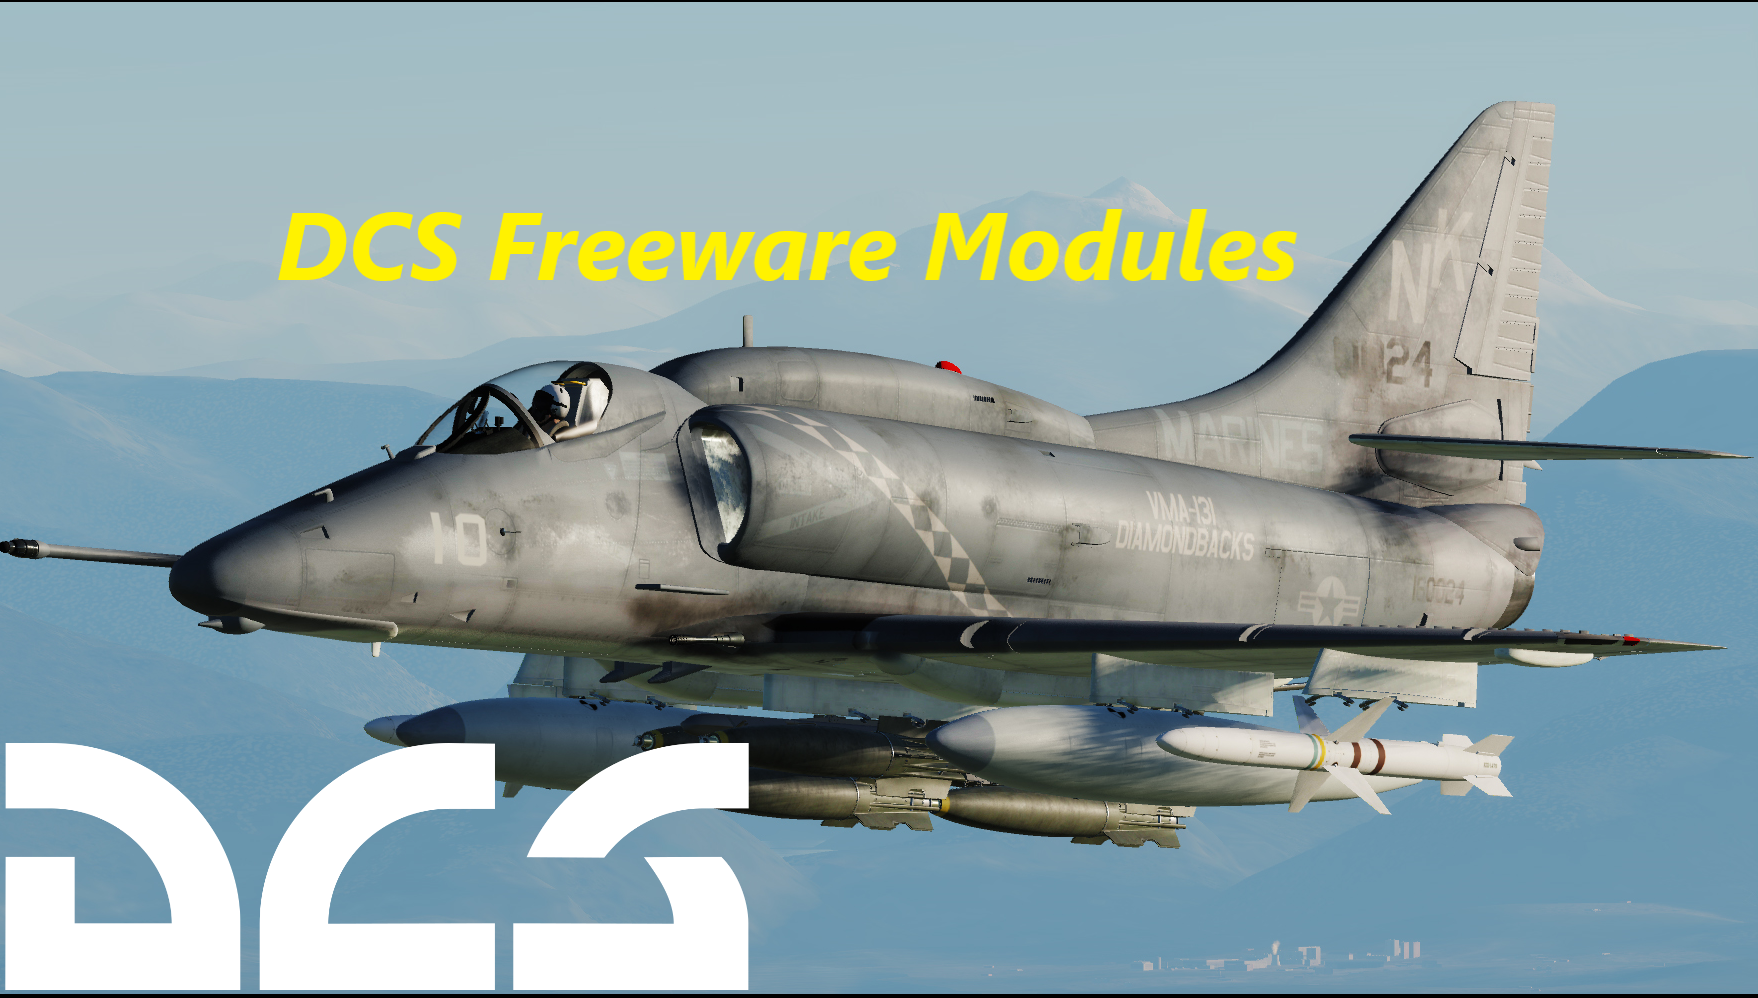 Get Amazing DCS World FREEWARE Aircraft Here Now!